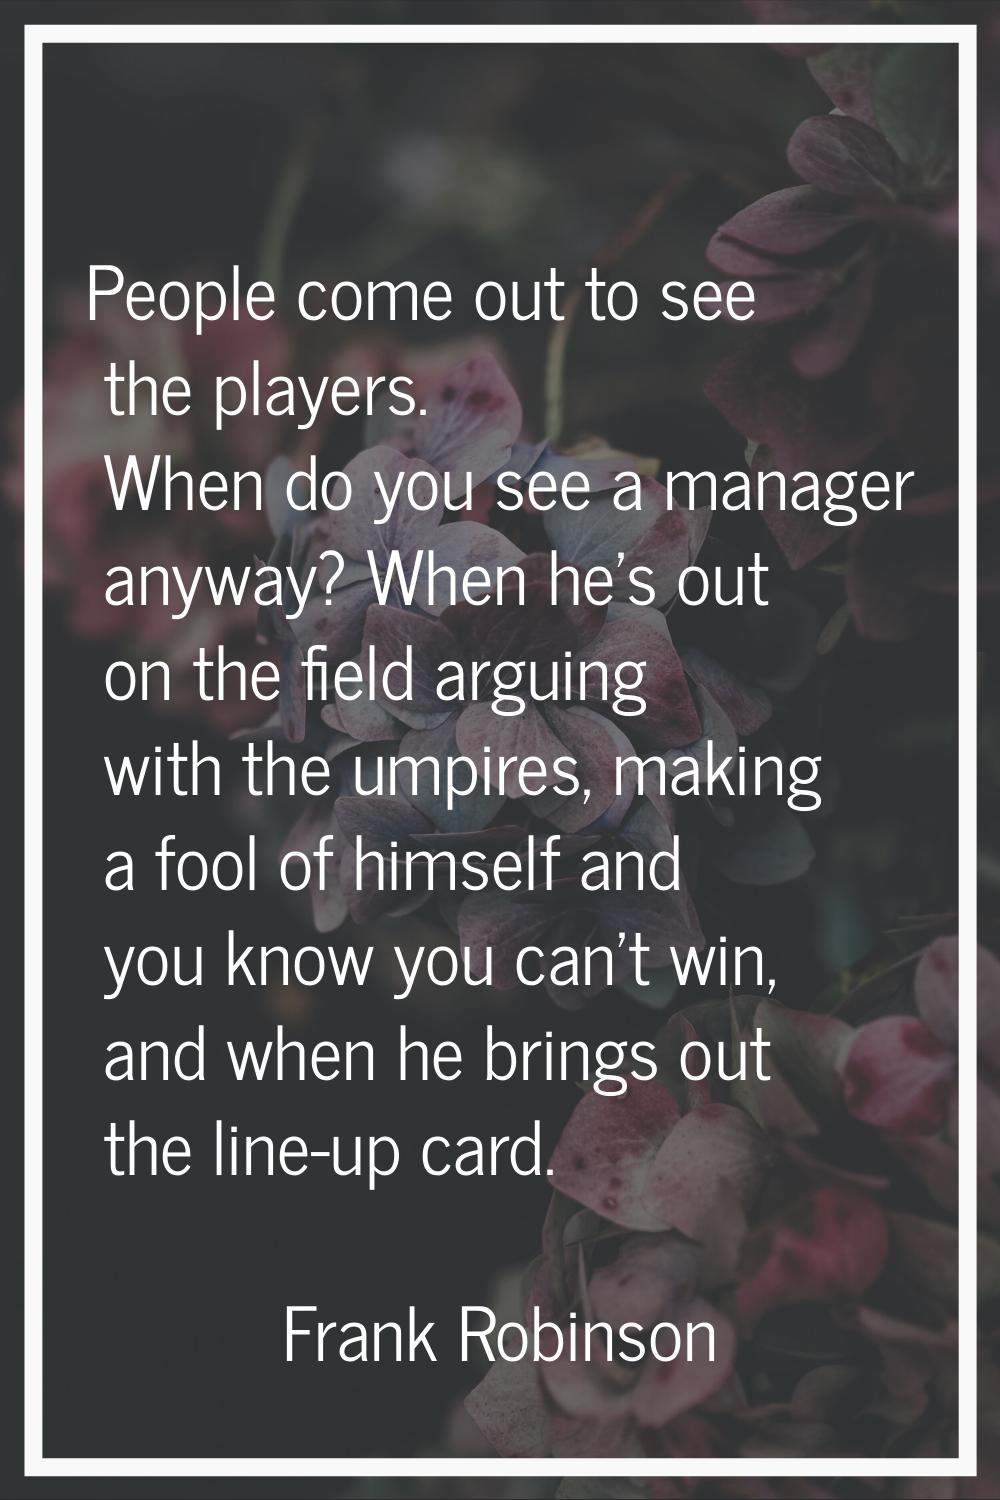 People come out to see the players. When do you see a manager anyway? When he's out on the field ar